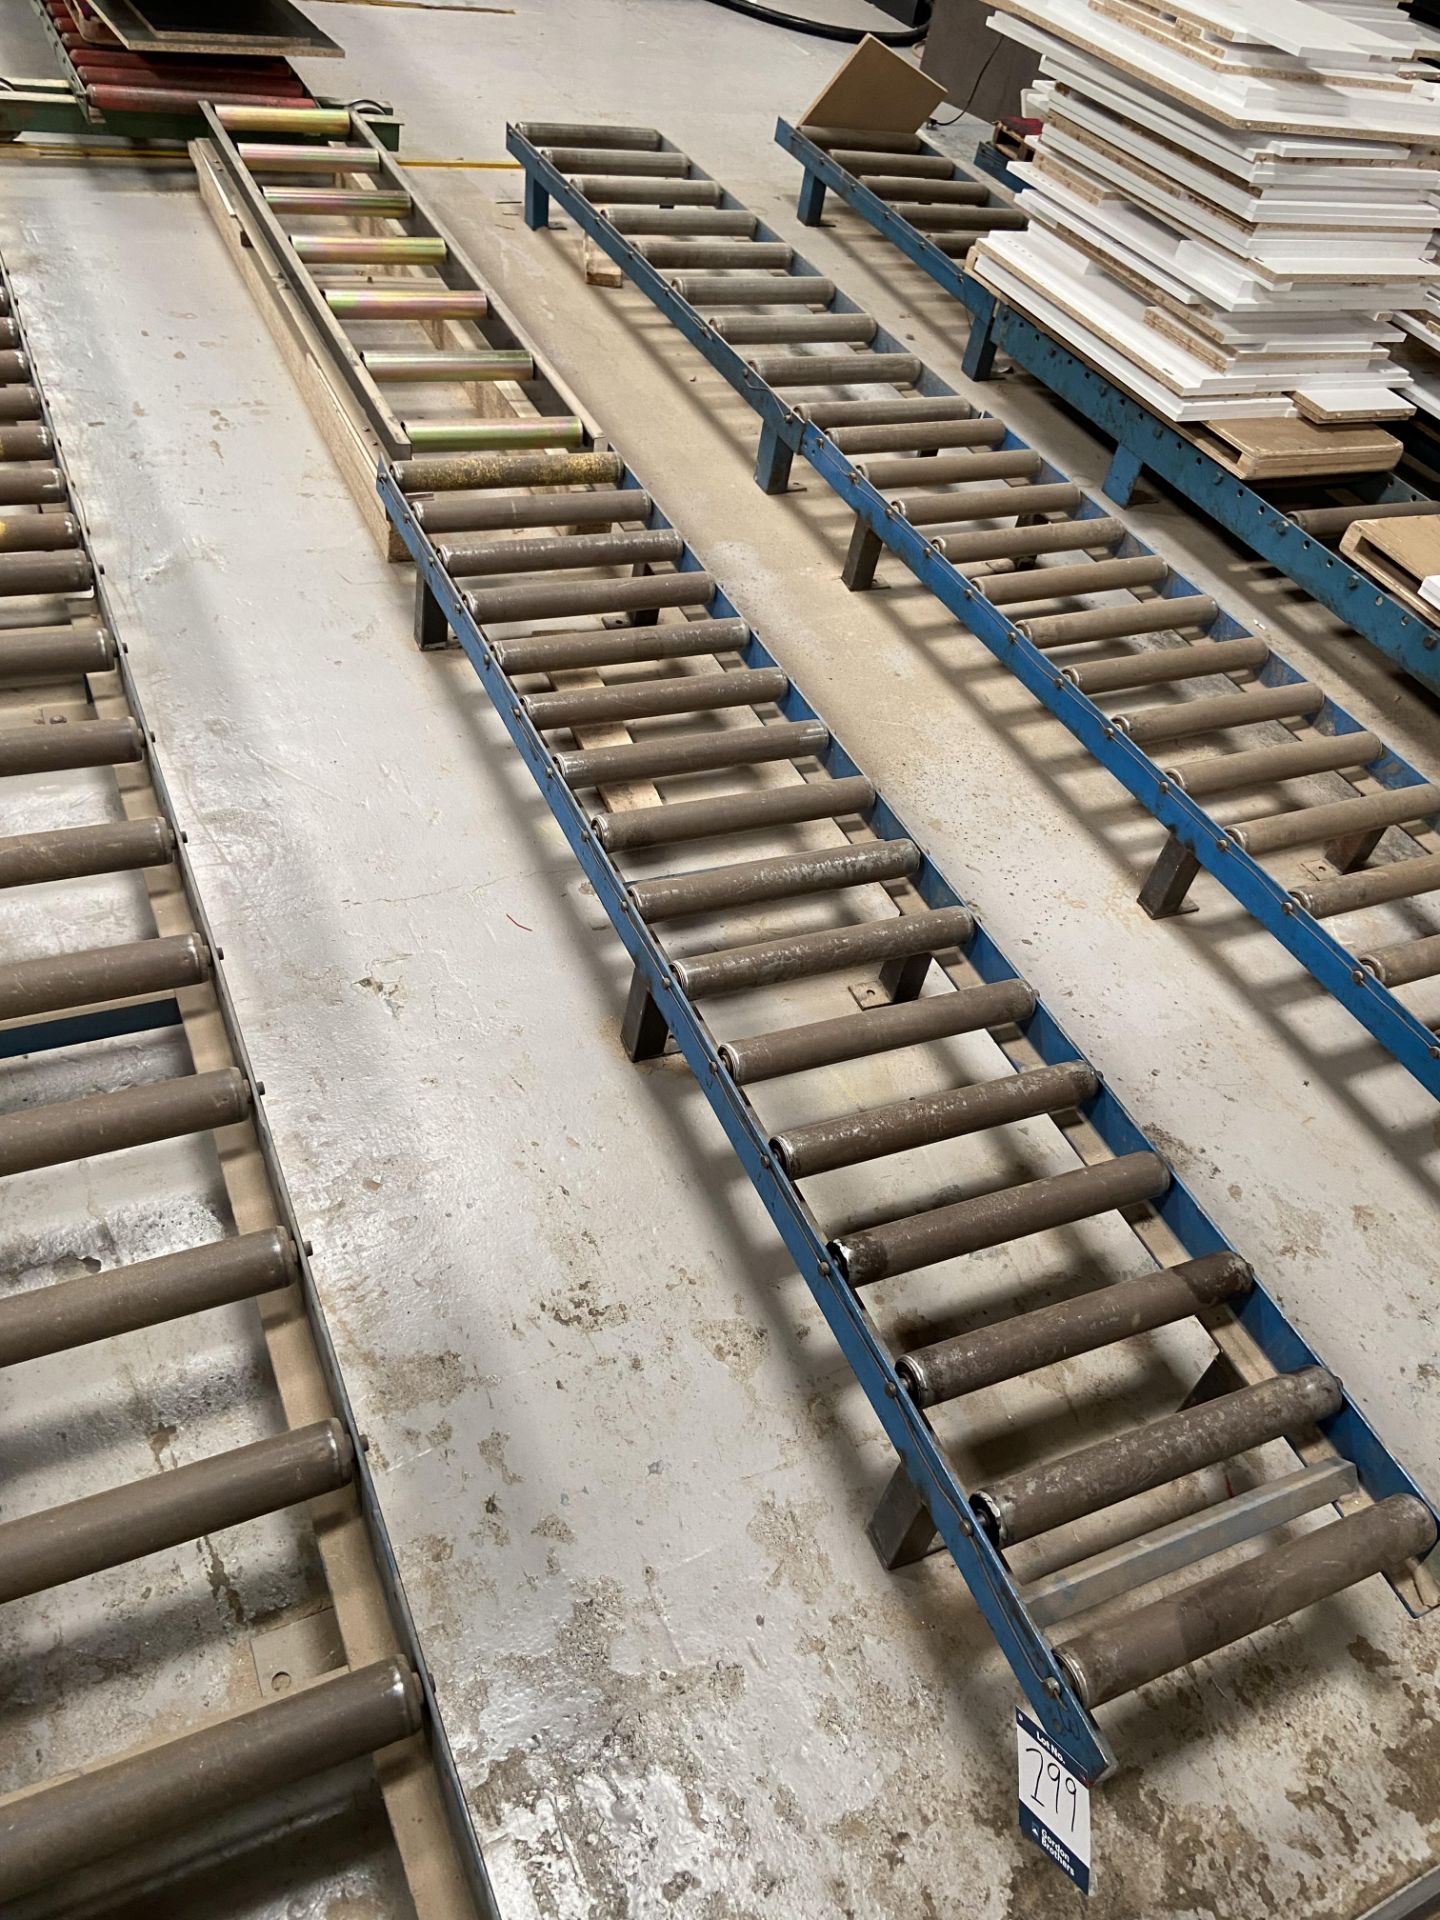 2 Section gravity roller conveyoring (1 section Axminster mounted on wooden blocks), total width